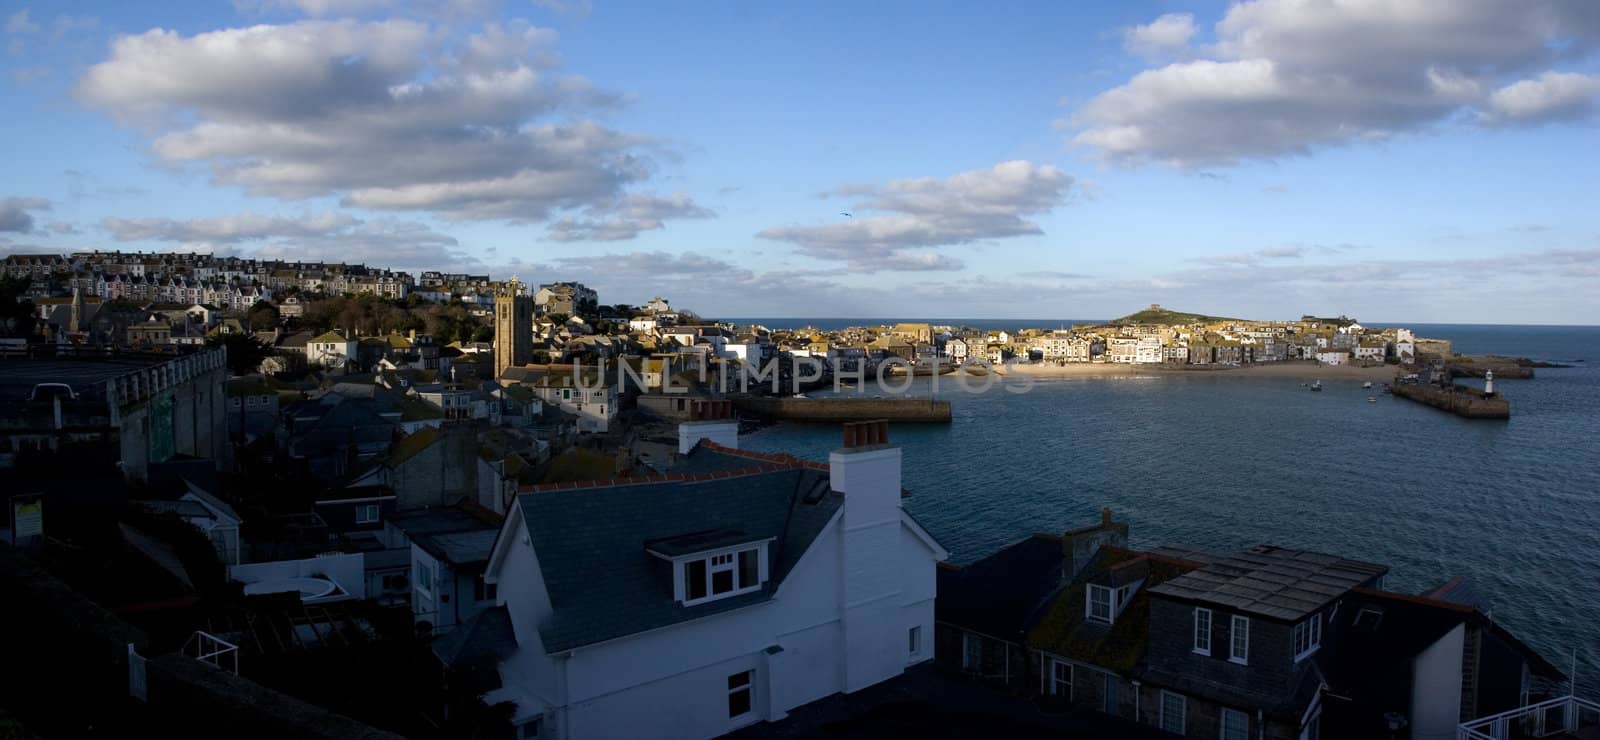 St Ives, at sunset by olliemt